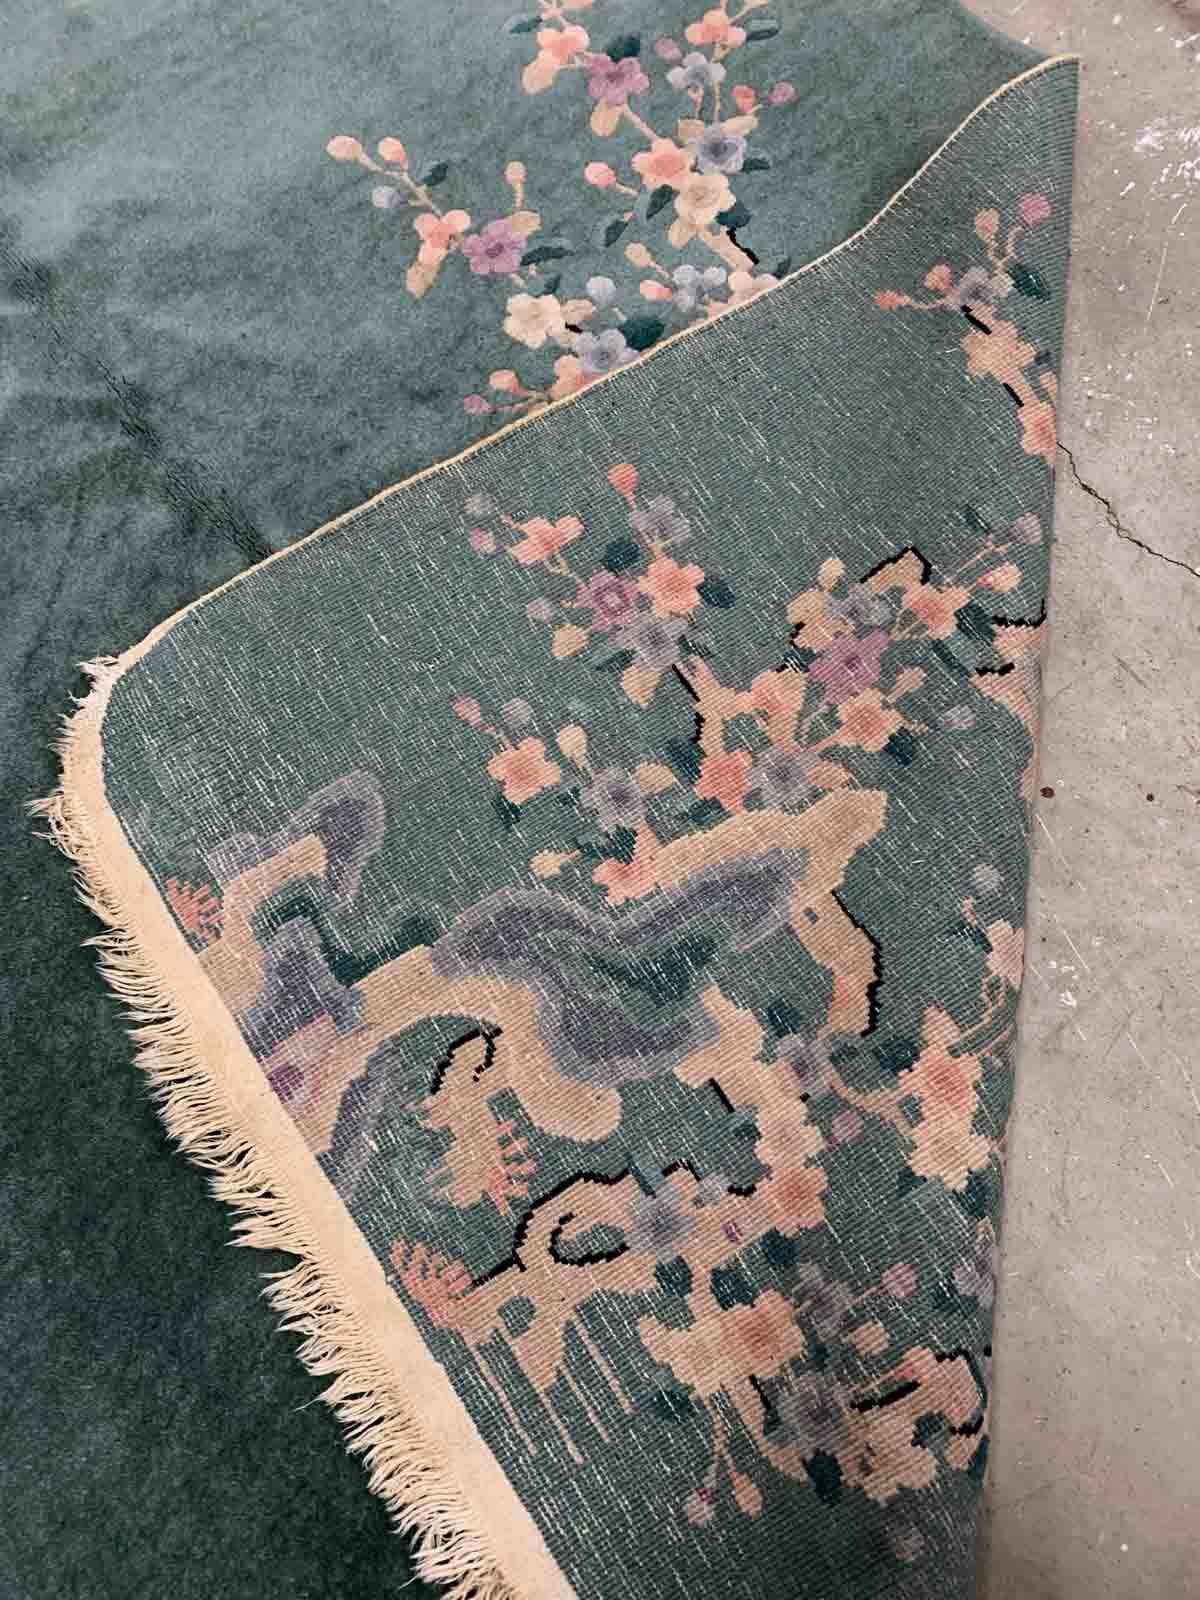 Handmade antique Art Deco Chinese rug in green shade with floral design. The rug is from the beginning of 20th century in original good condition. 

-condition: original good, 

-circa: 1920s,

-size: 5.1' x 8.2' (155cm x